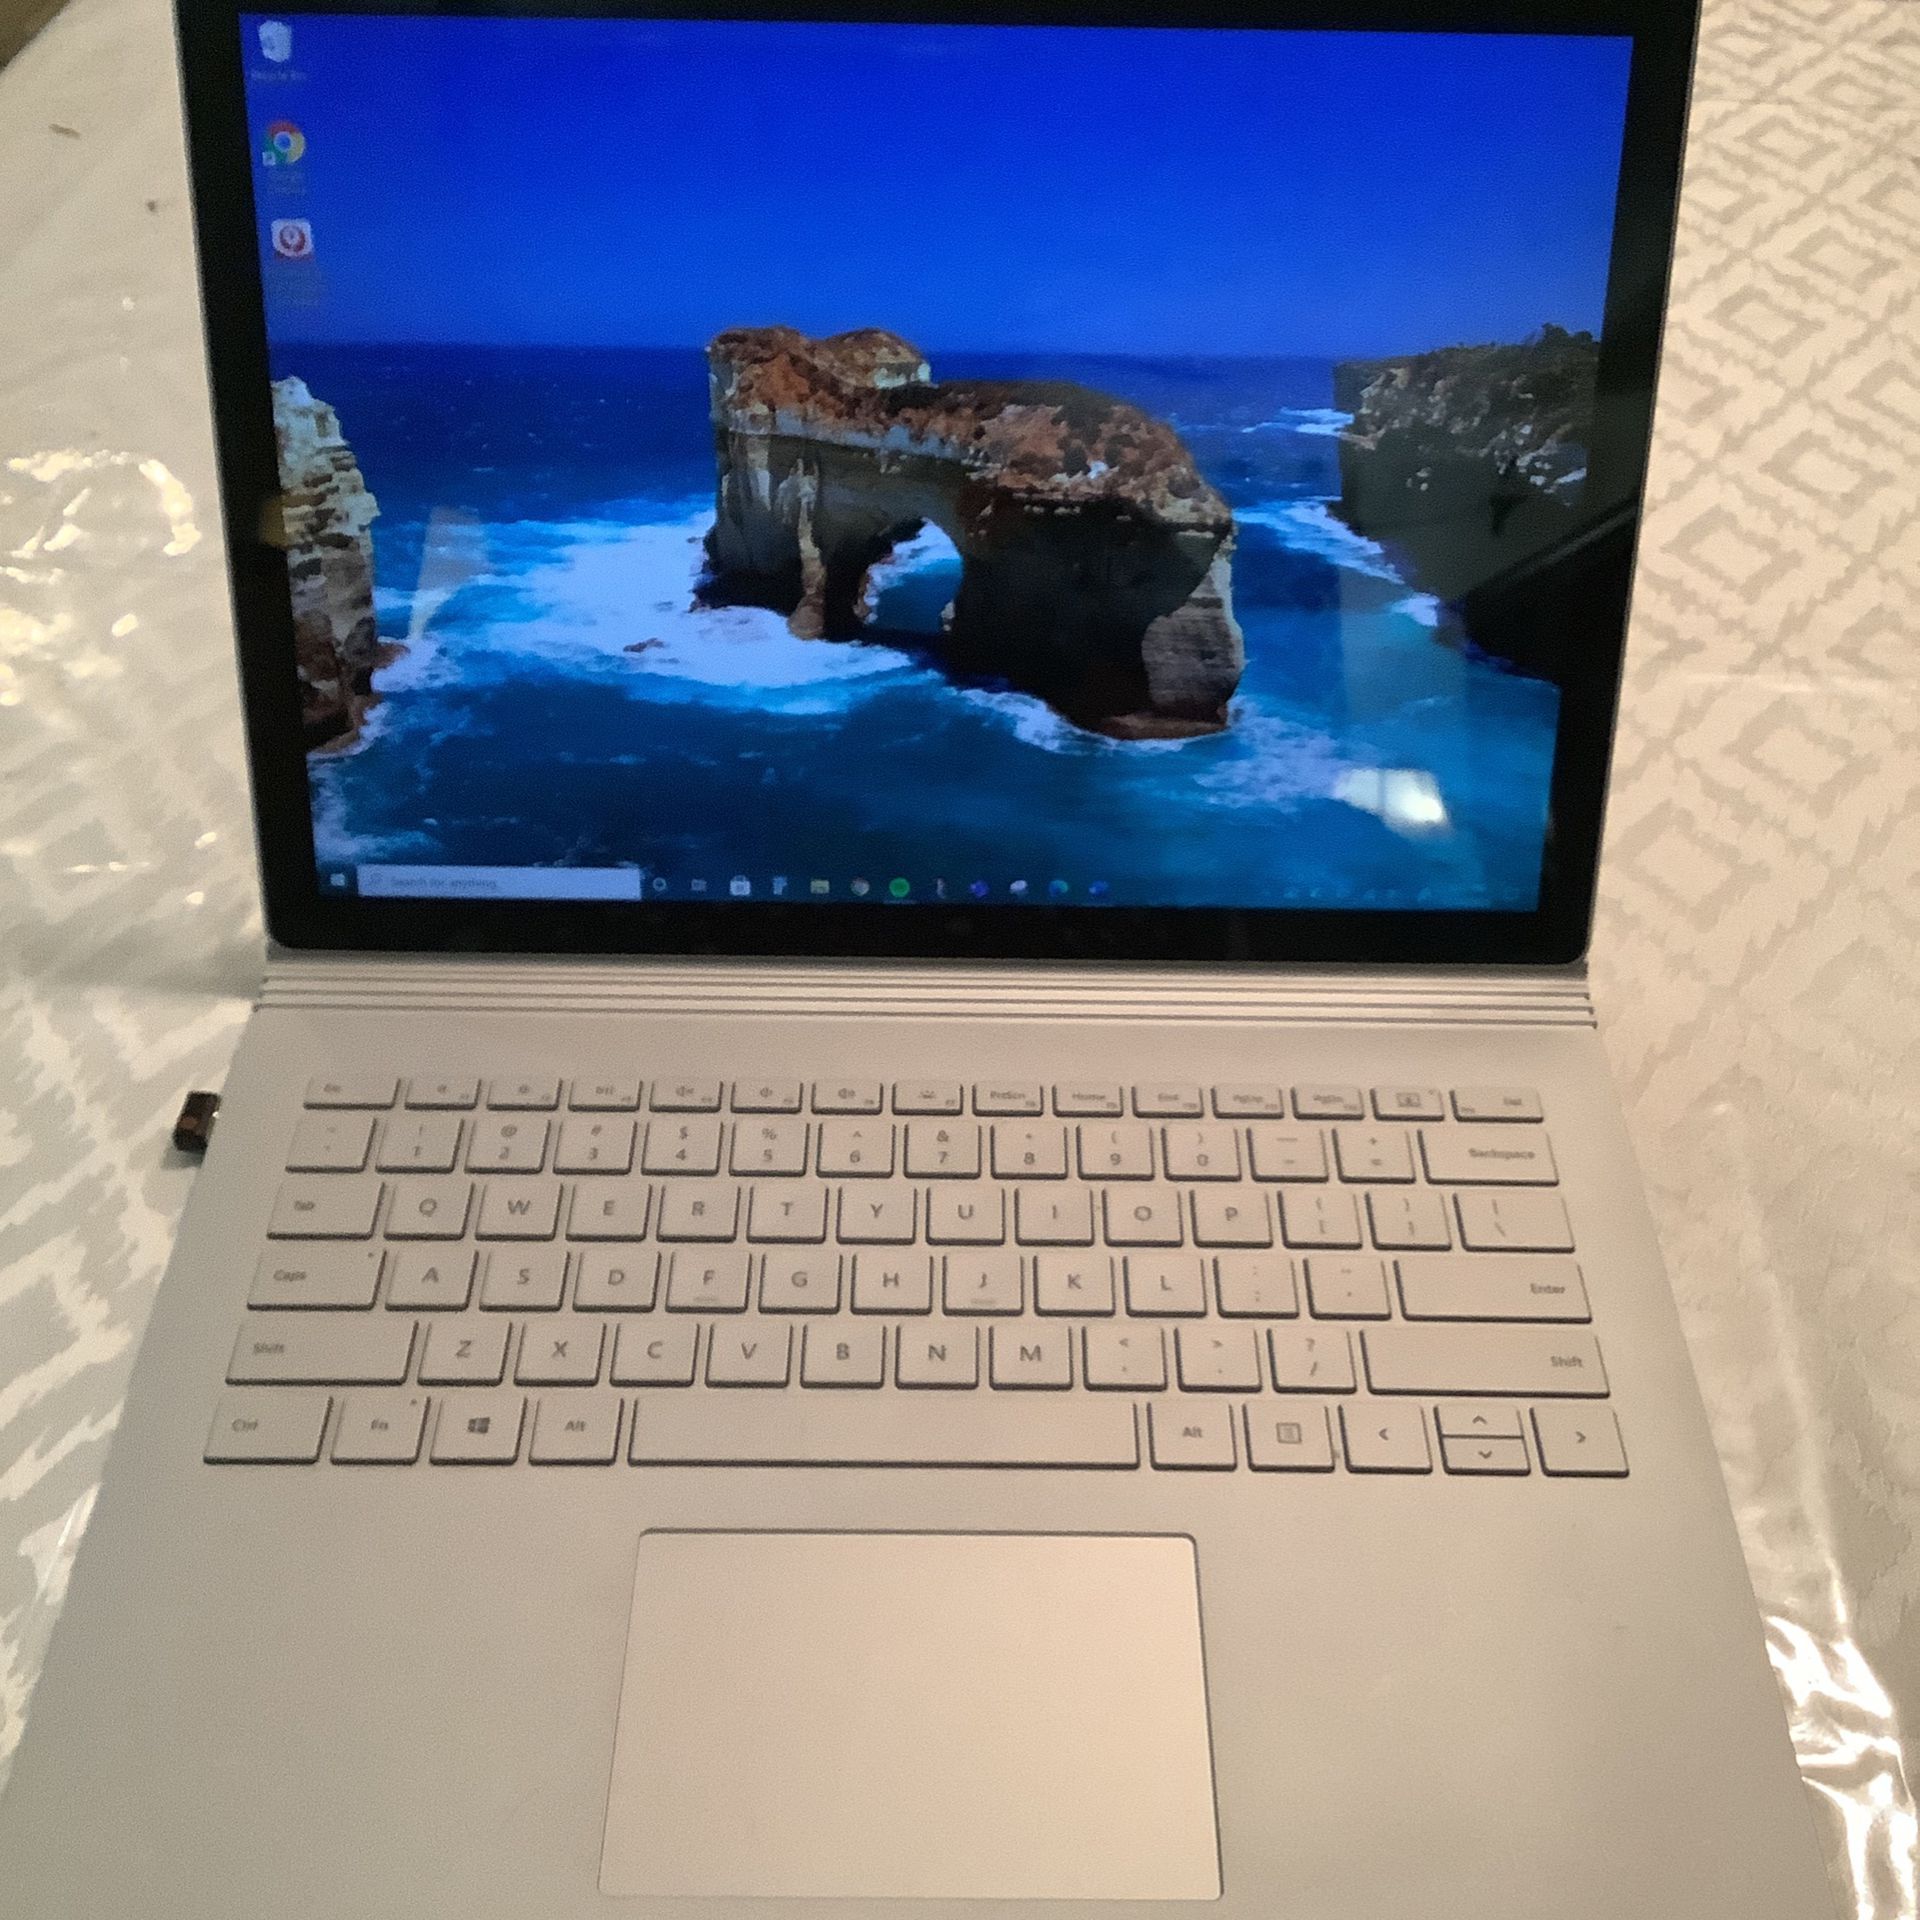 Perfect For Black Friday - Microsoft Surface Book 2 - 13.5 Inch - Intel I5 - 8GB Ram